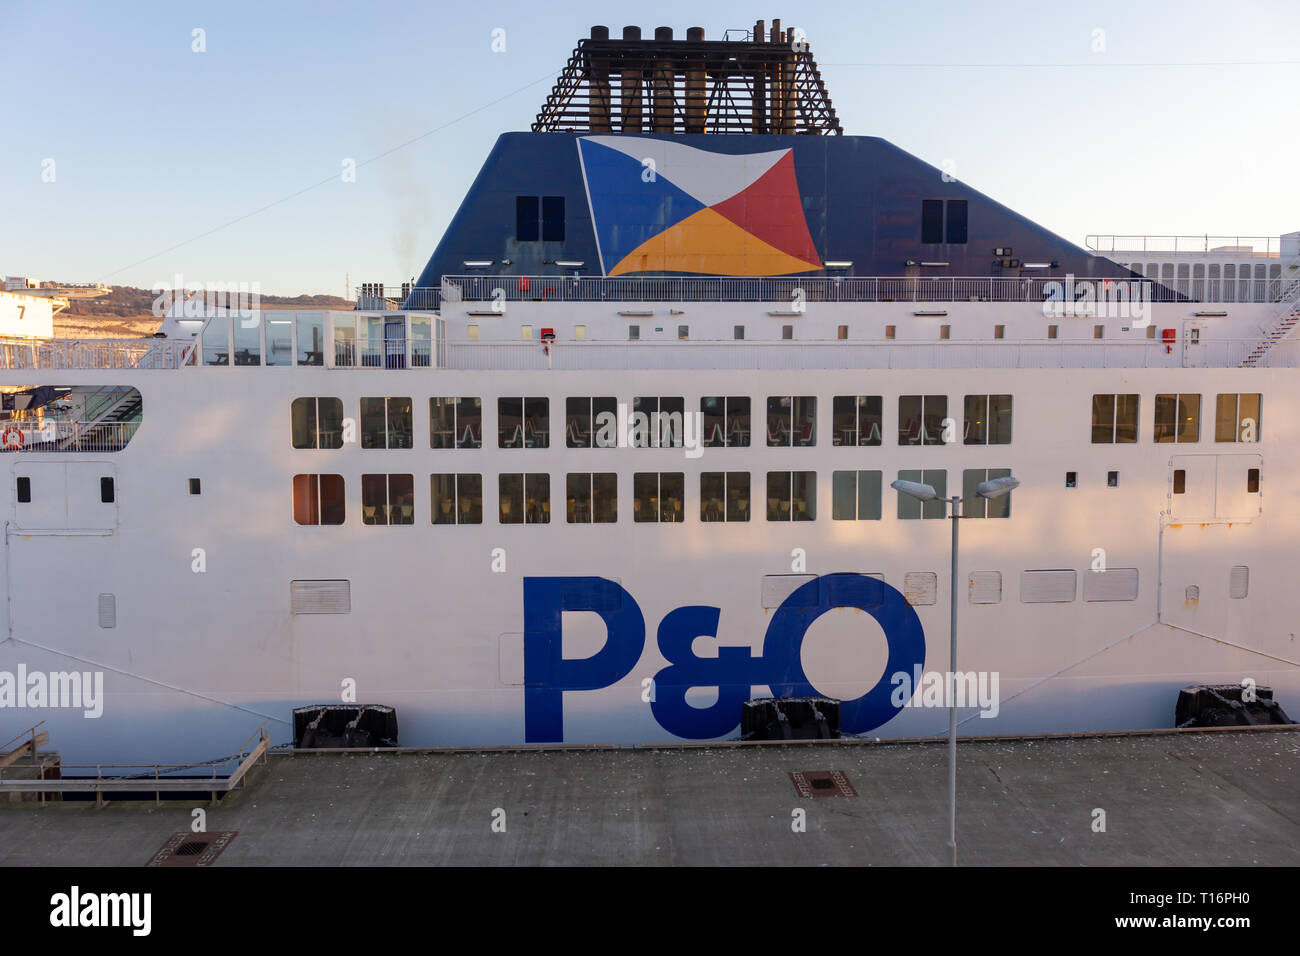 25th February 2019; Dover, Kent, UK; Detail View of Side of Ferry Operated by P&O Ferries with Company Name and Logo Stock Photo